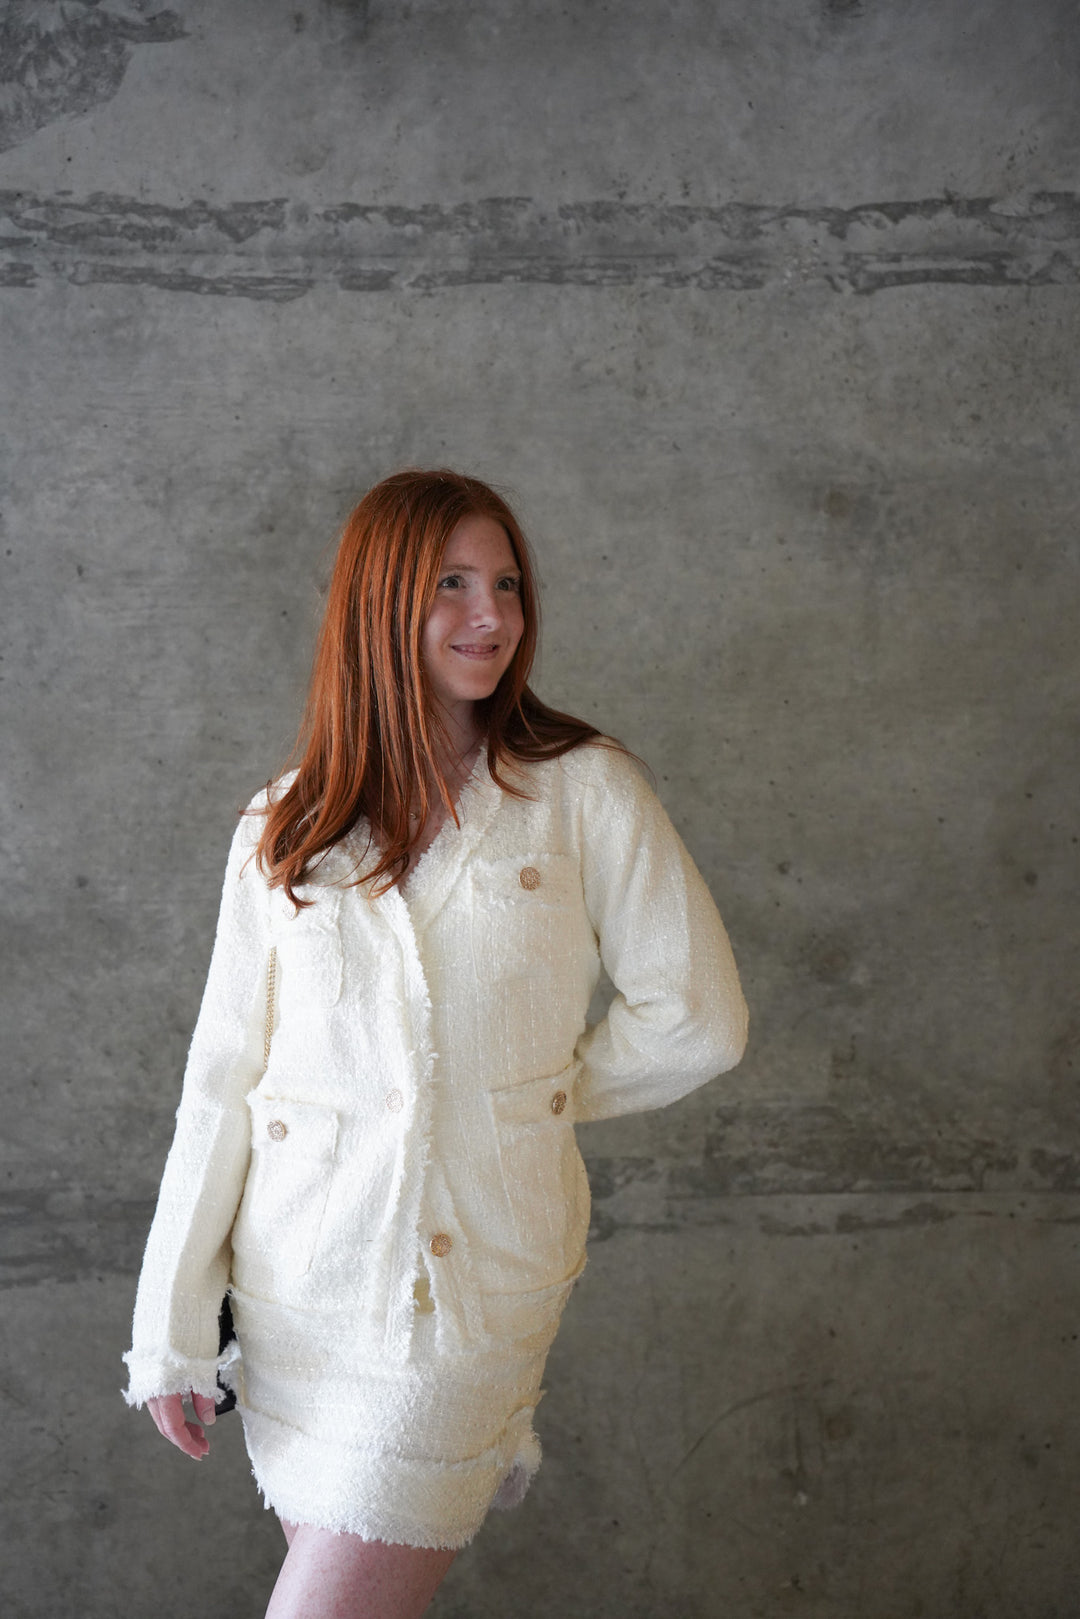 Women wearing white tweed jacket with pockets and gold buttons